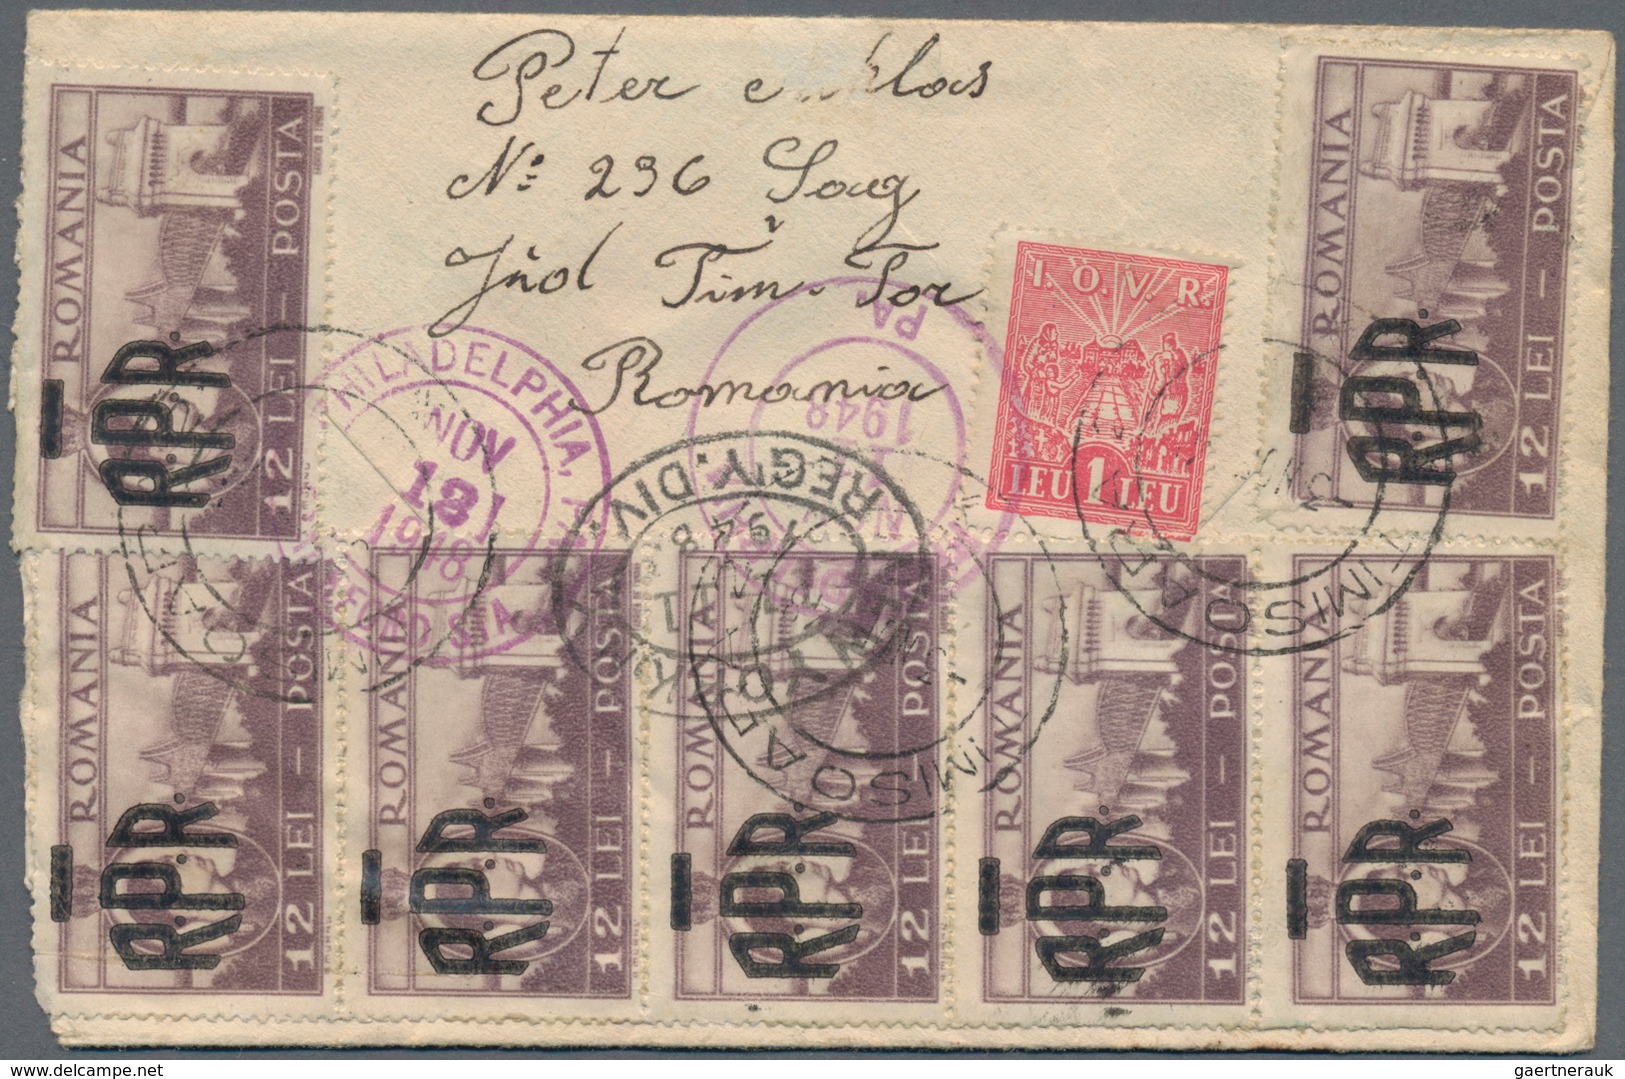 Rumänien: 1945/1965, holding of apprx. 137 covers/cards showing an attractive range of interesting f